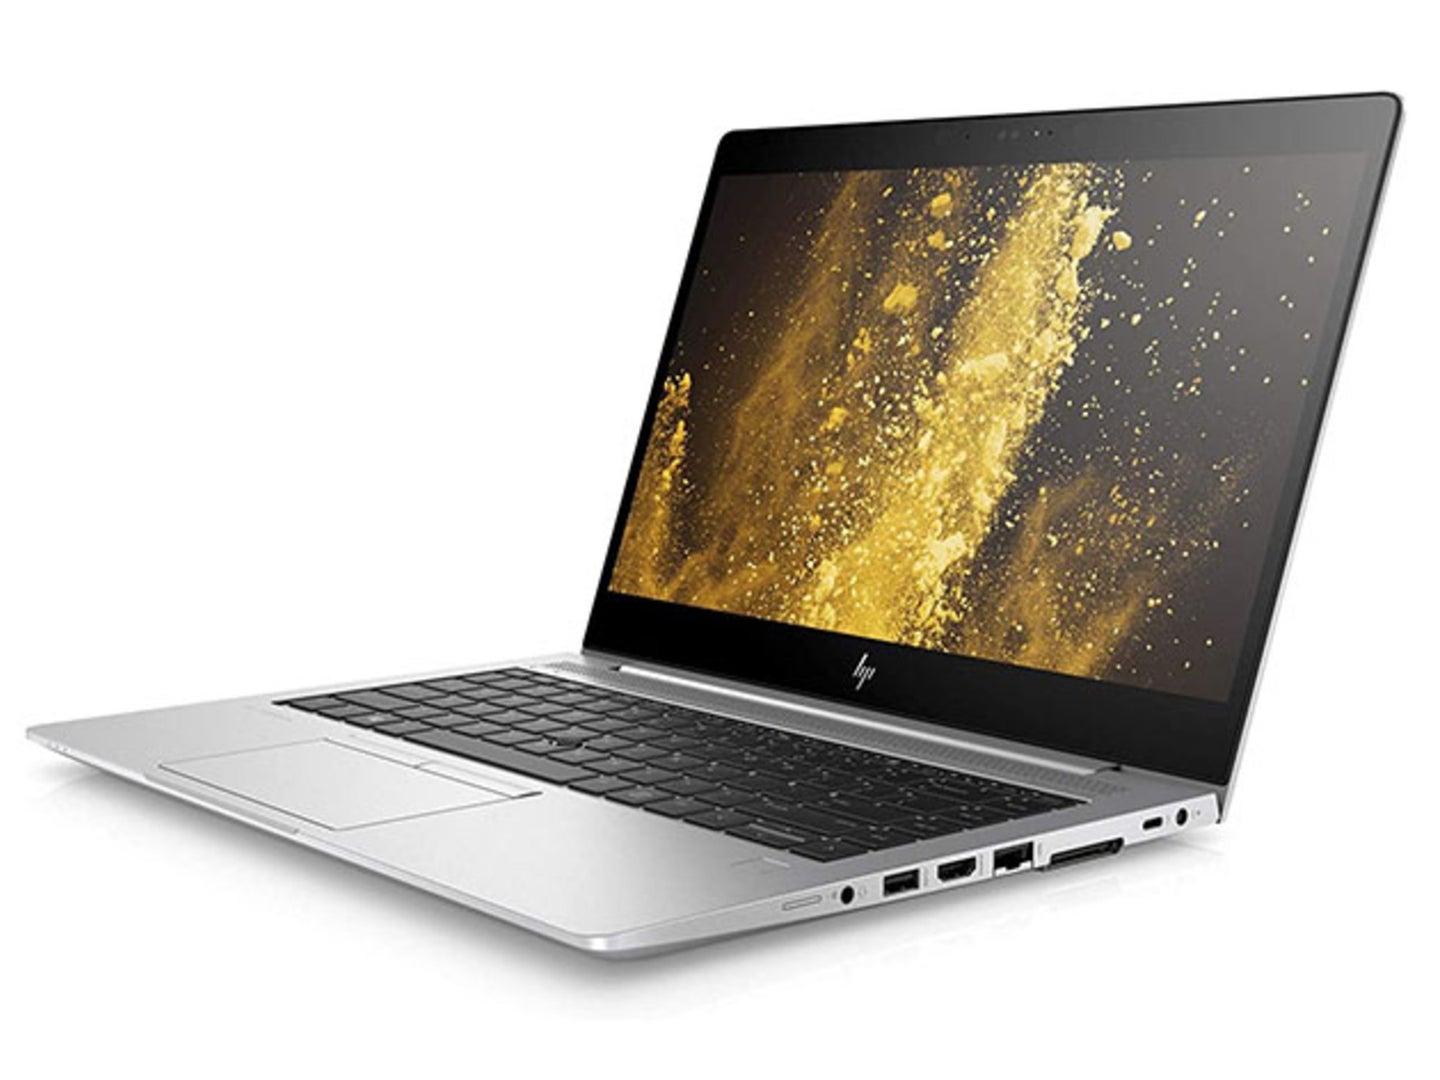 An HP laptop on a white background